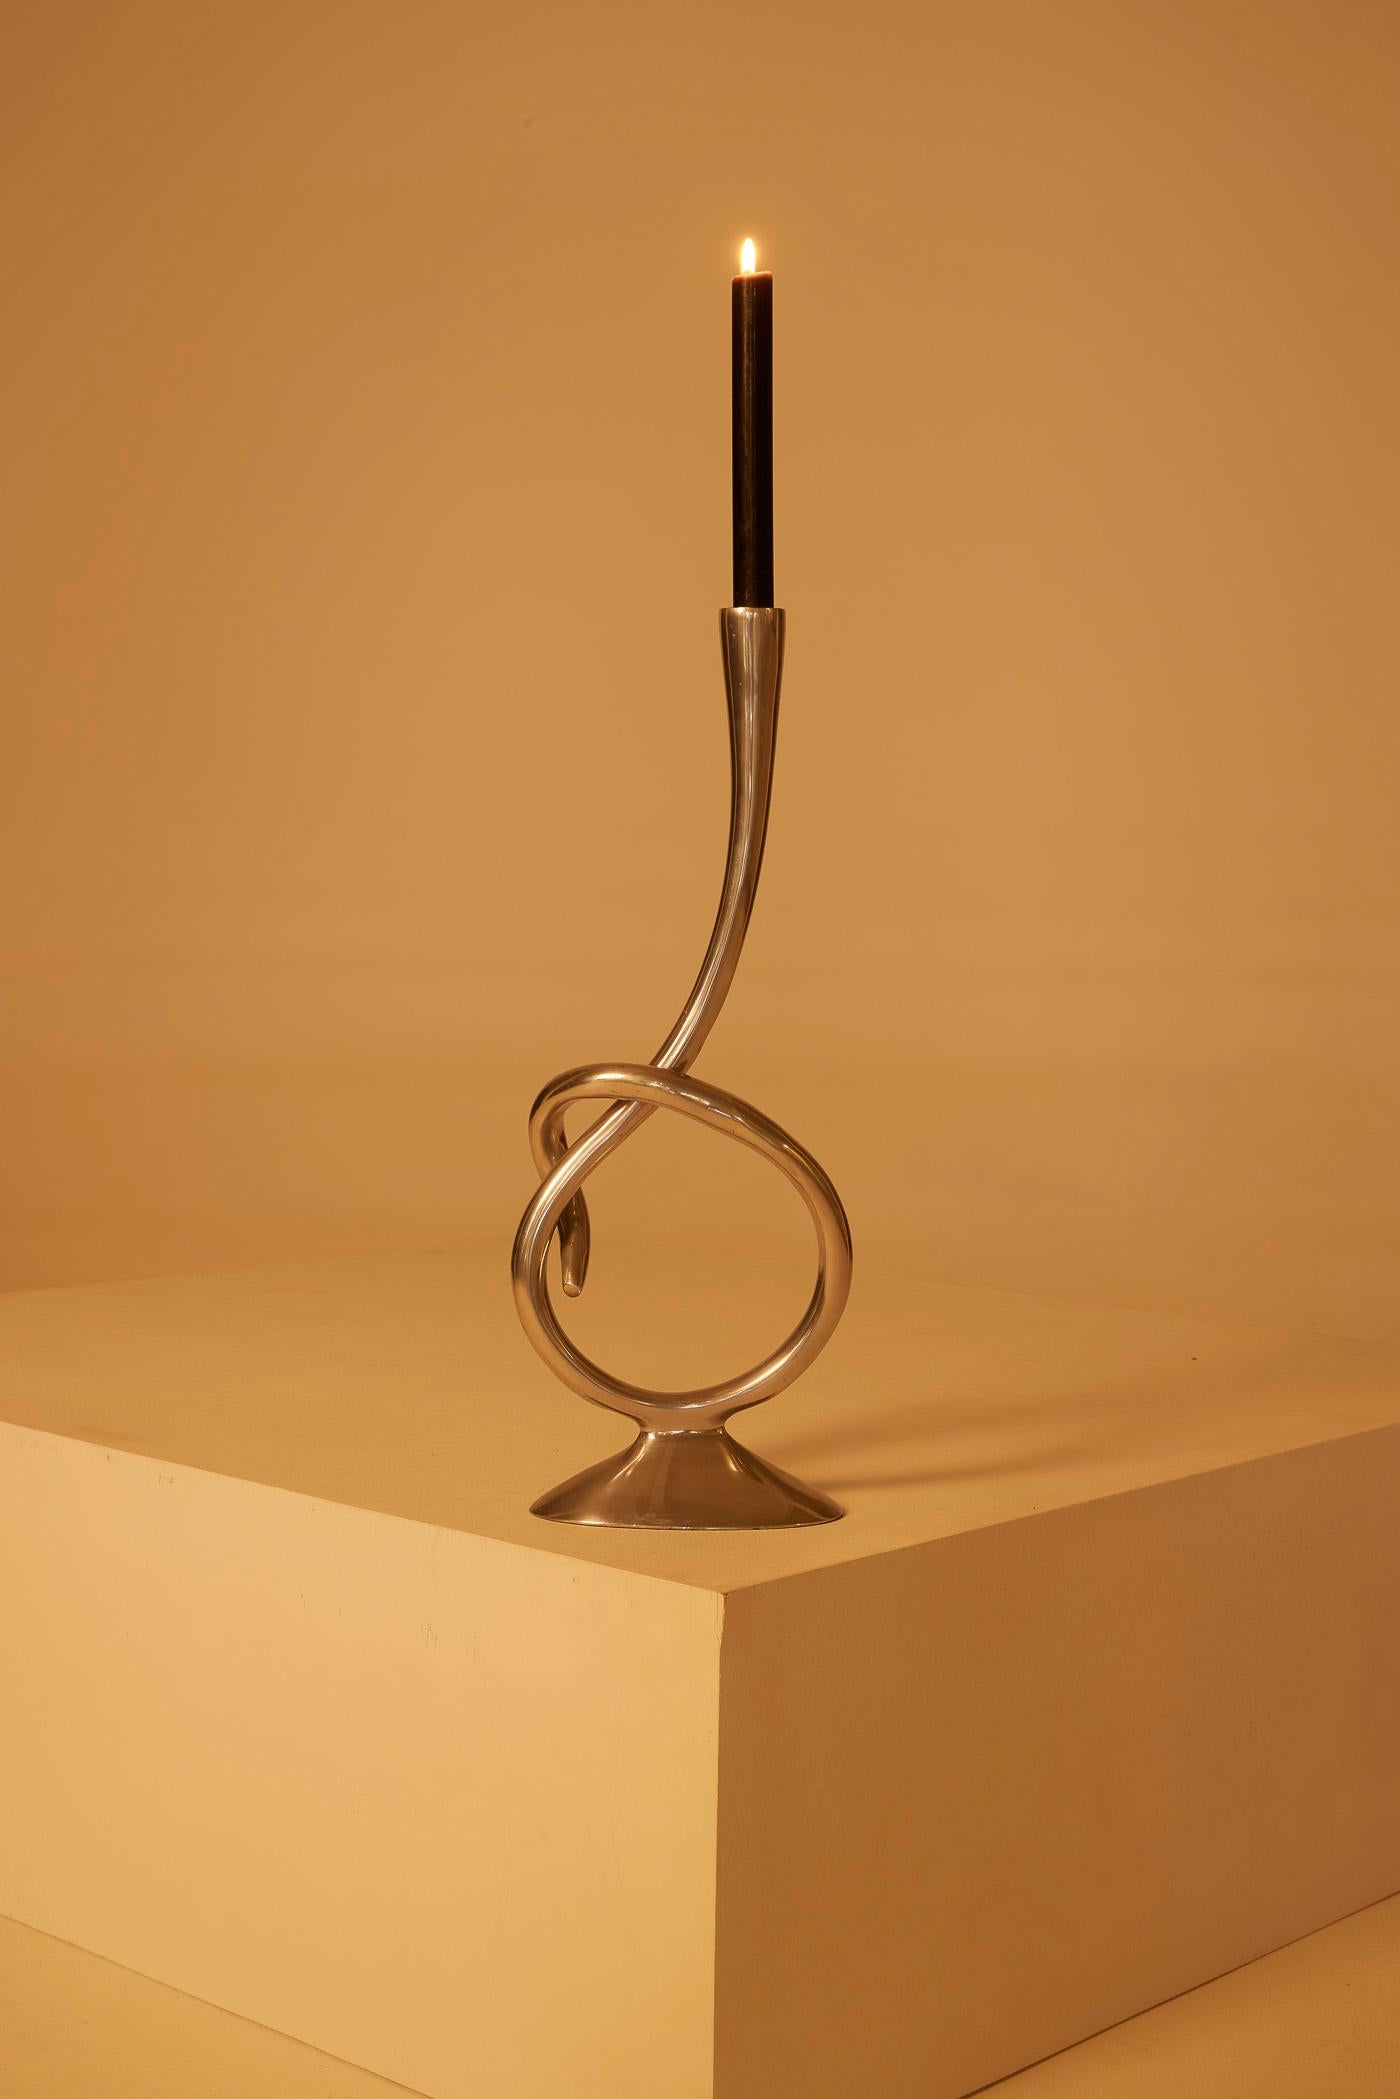 Space Age Modernist knot candlestick